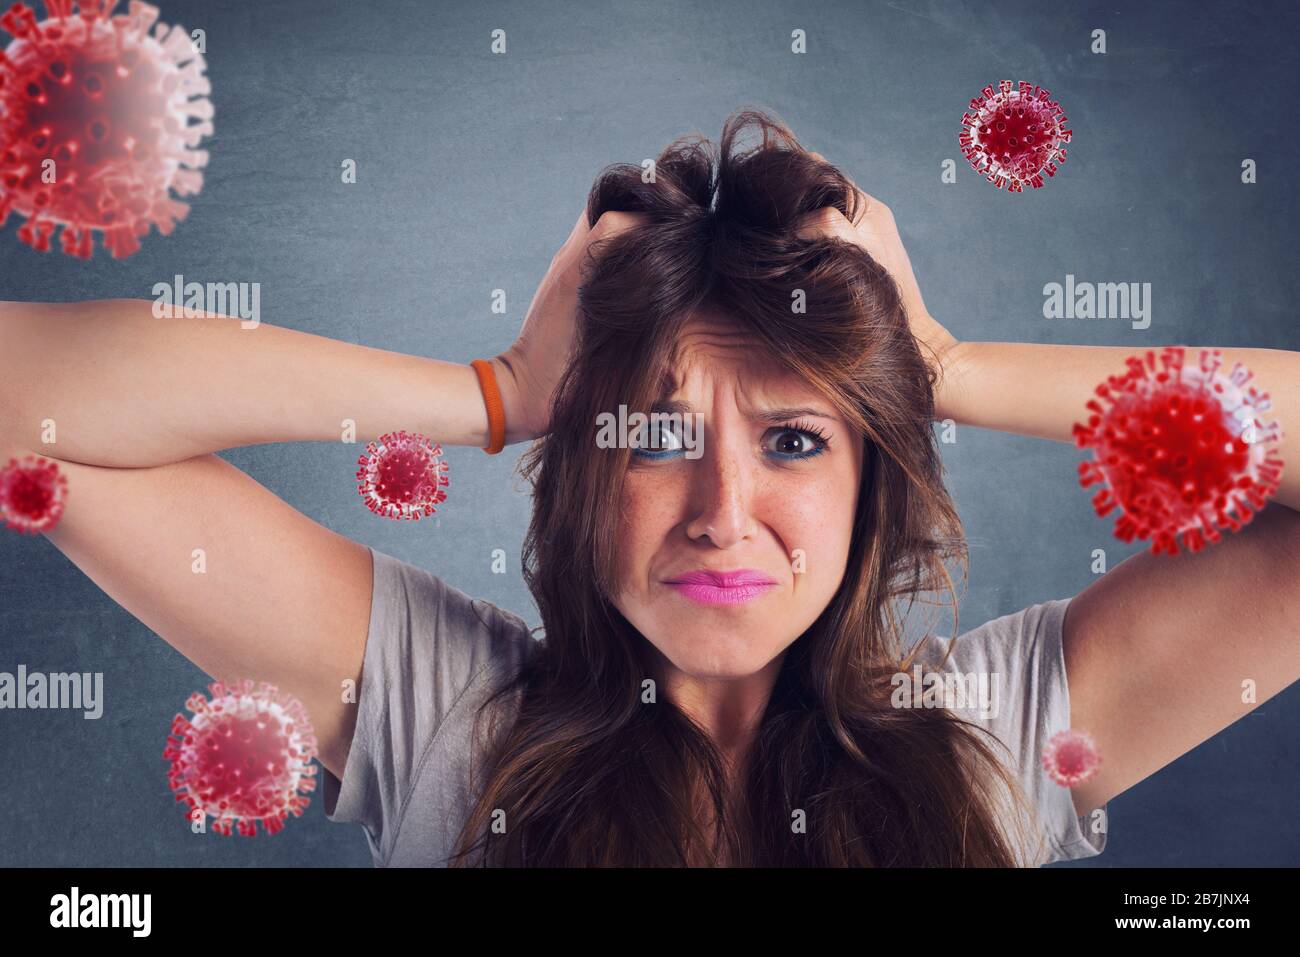 Feared girl attacked by viruses and bacteria. Concept of illness Stock Photo